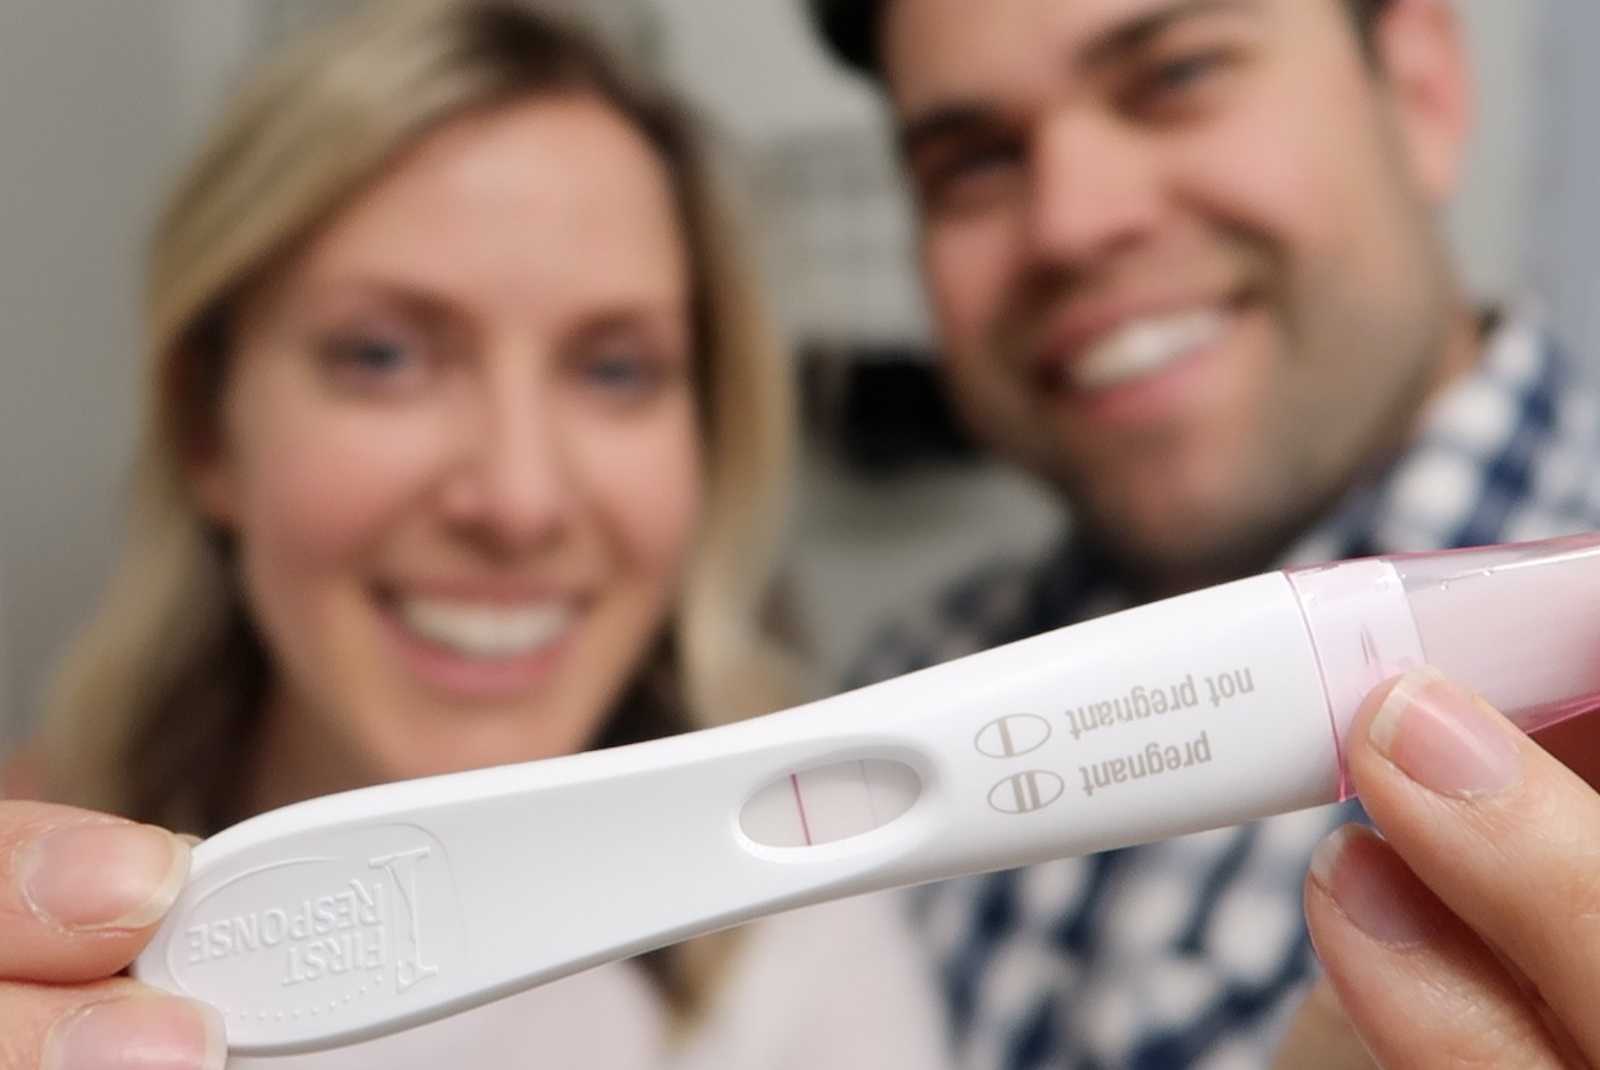 Husband and wife holding up pregnancy test that indicated pregnancy